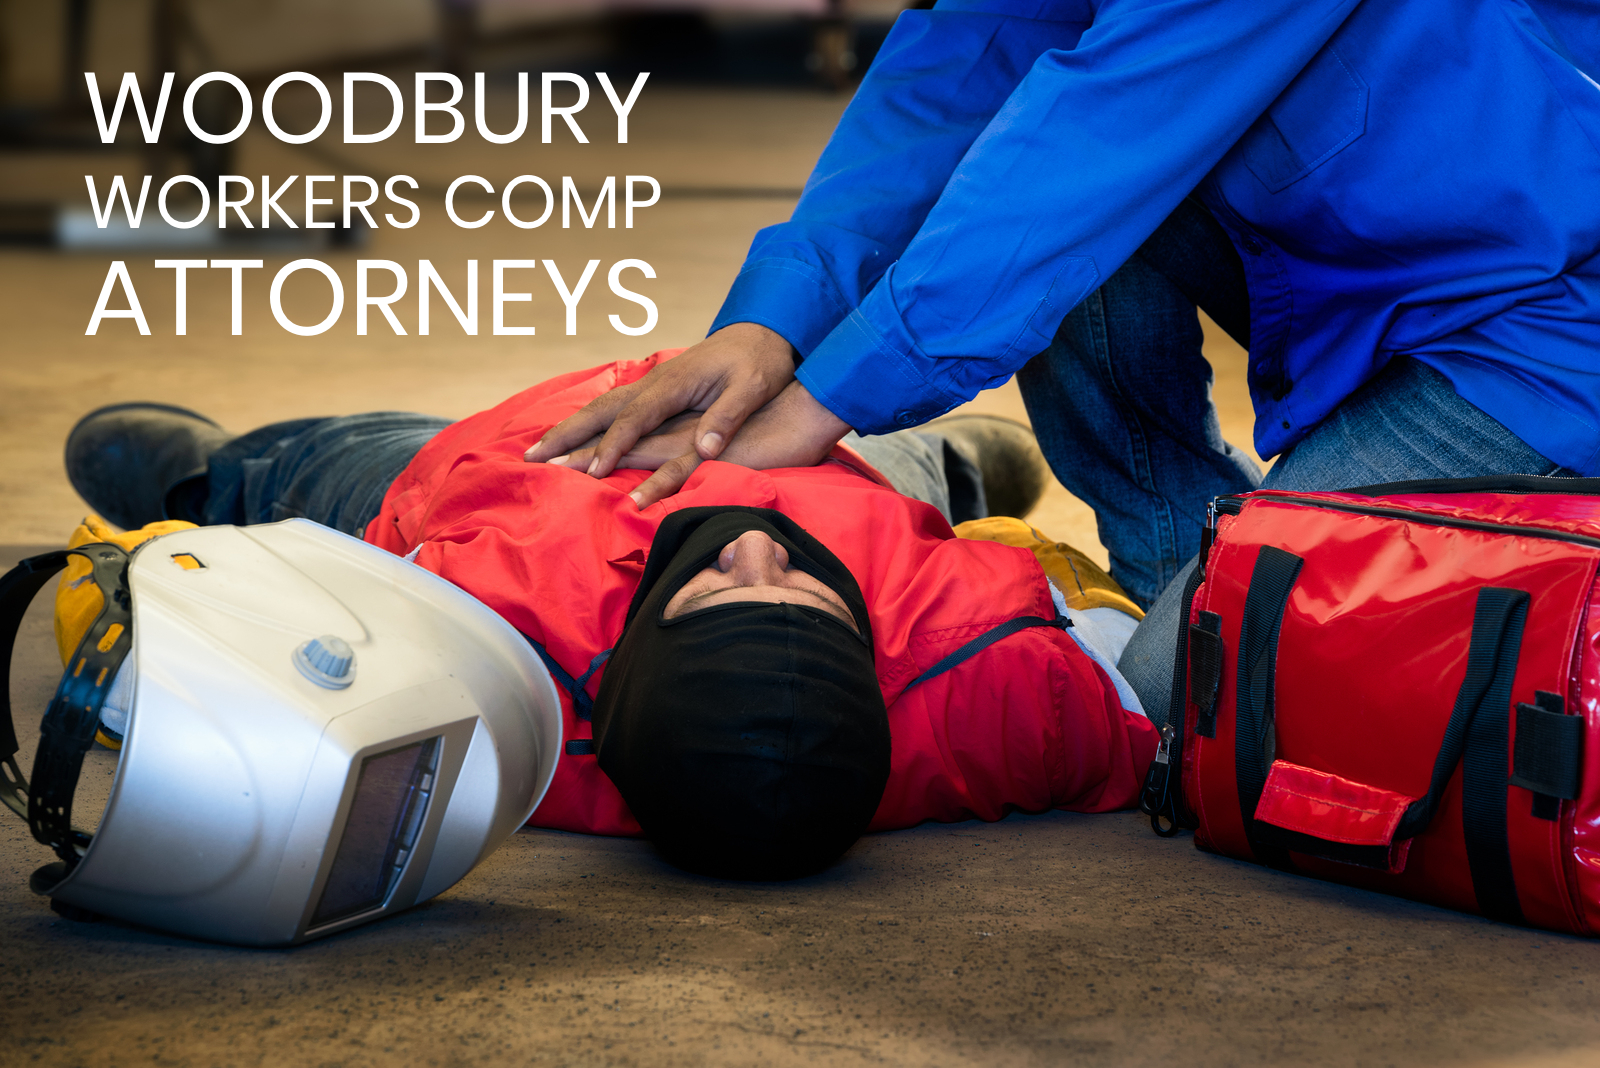 injured worker in Minnesota factory - Woodbury workers compensation attorneys - sand law llc